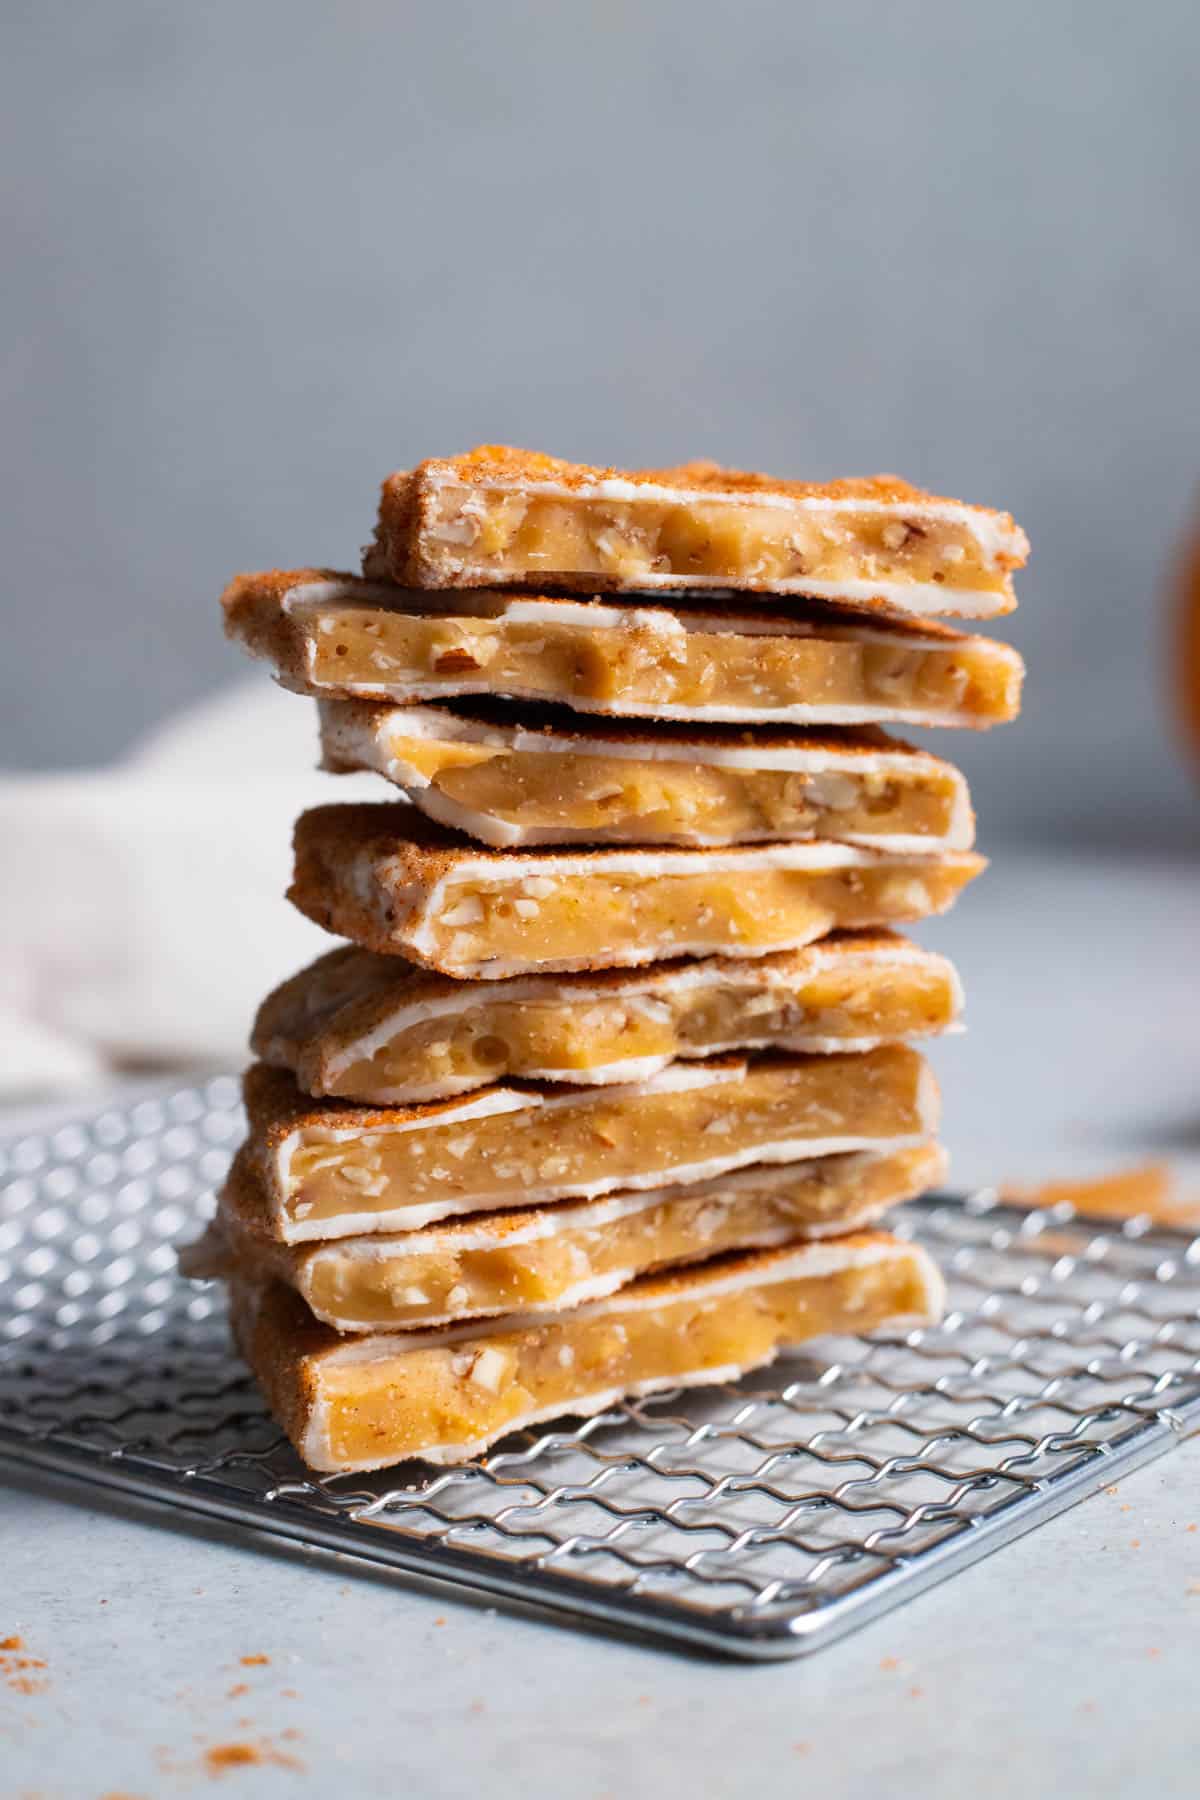 A stack of churro toffee.